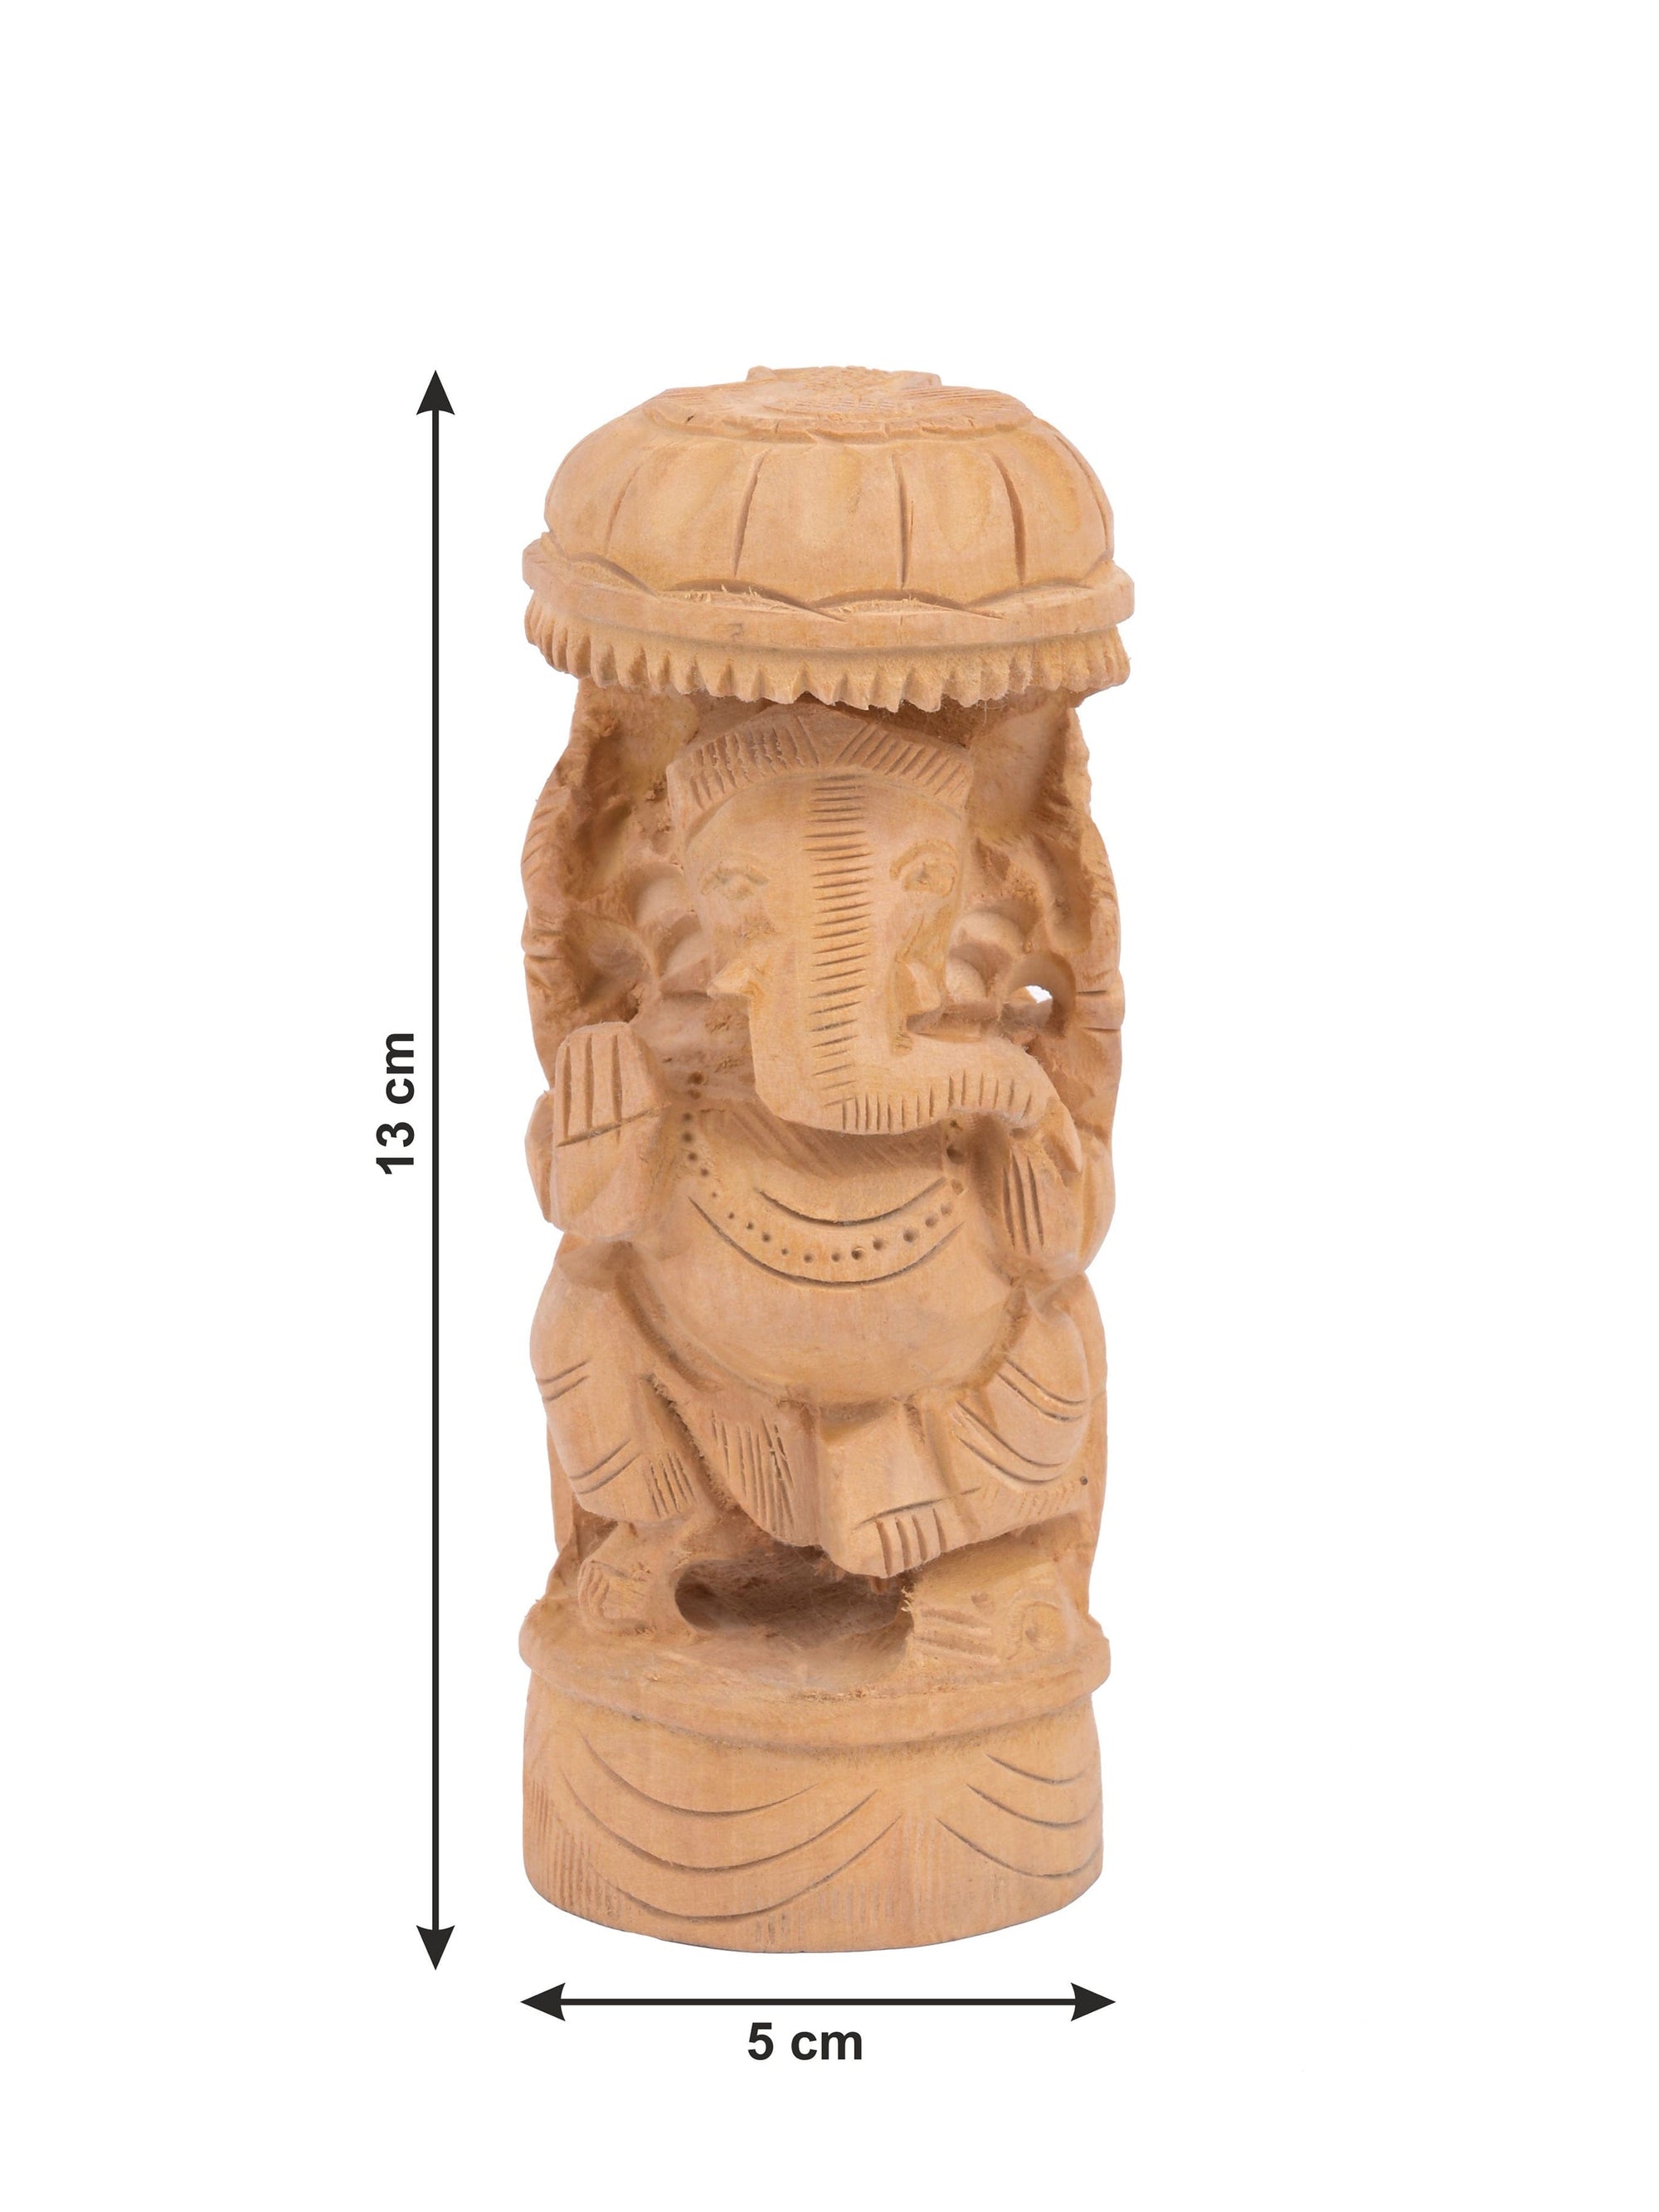 Kadam wood carved round shaped Lord Ganesh with Chatri / Umbrella - 5 inches in height - The Heritage Artifacts